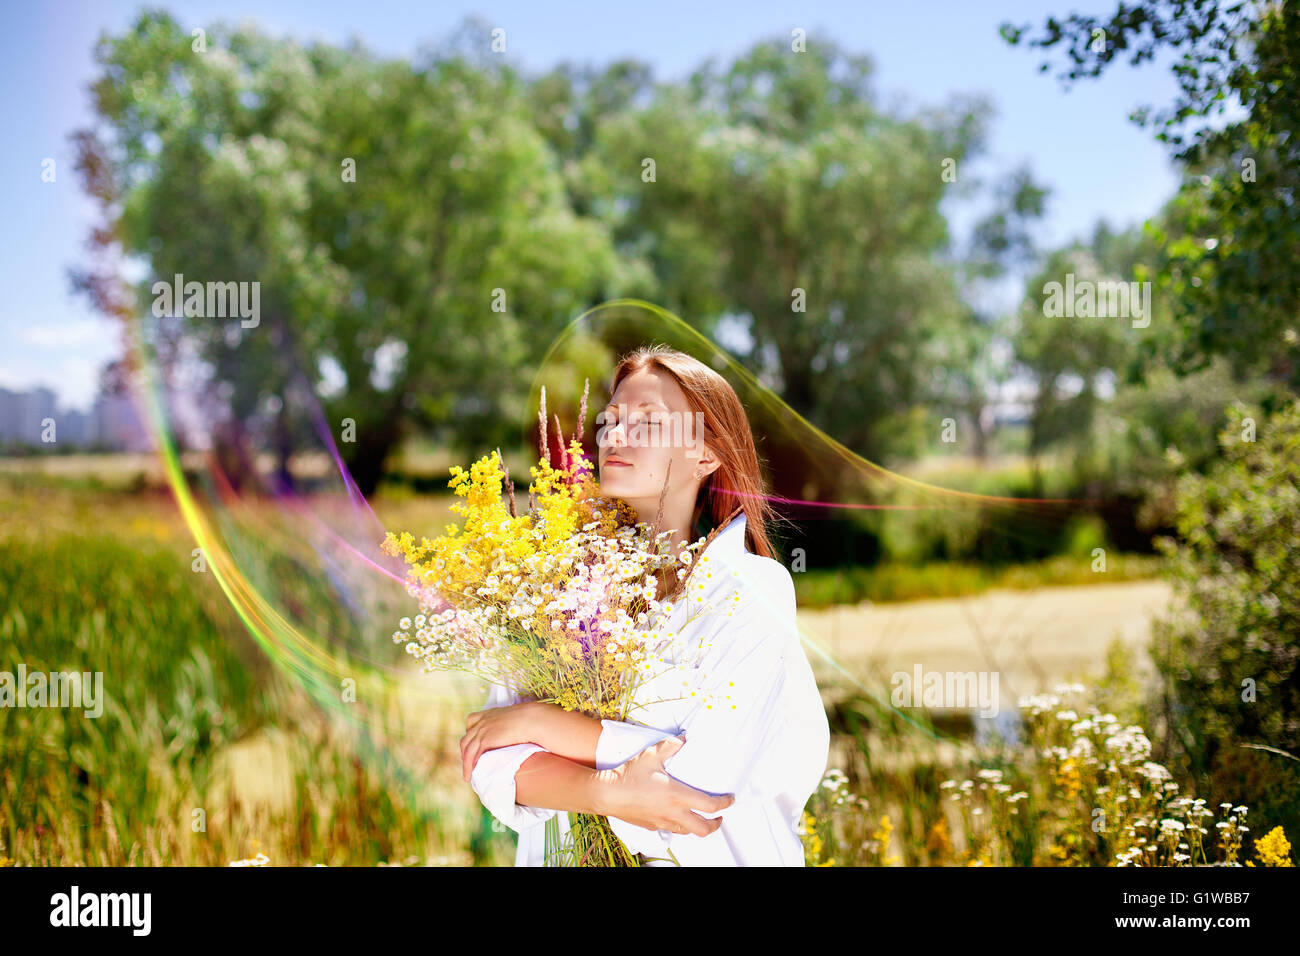 The girl holds a bouquet of wild flowers in hand. Stock Photo